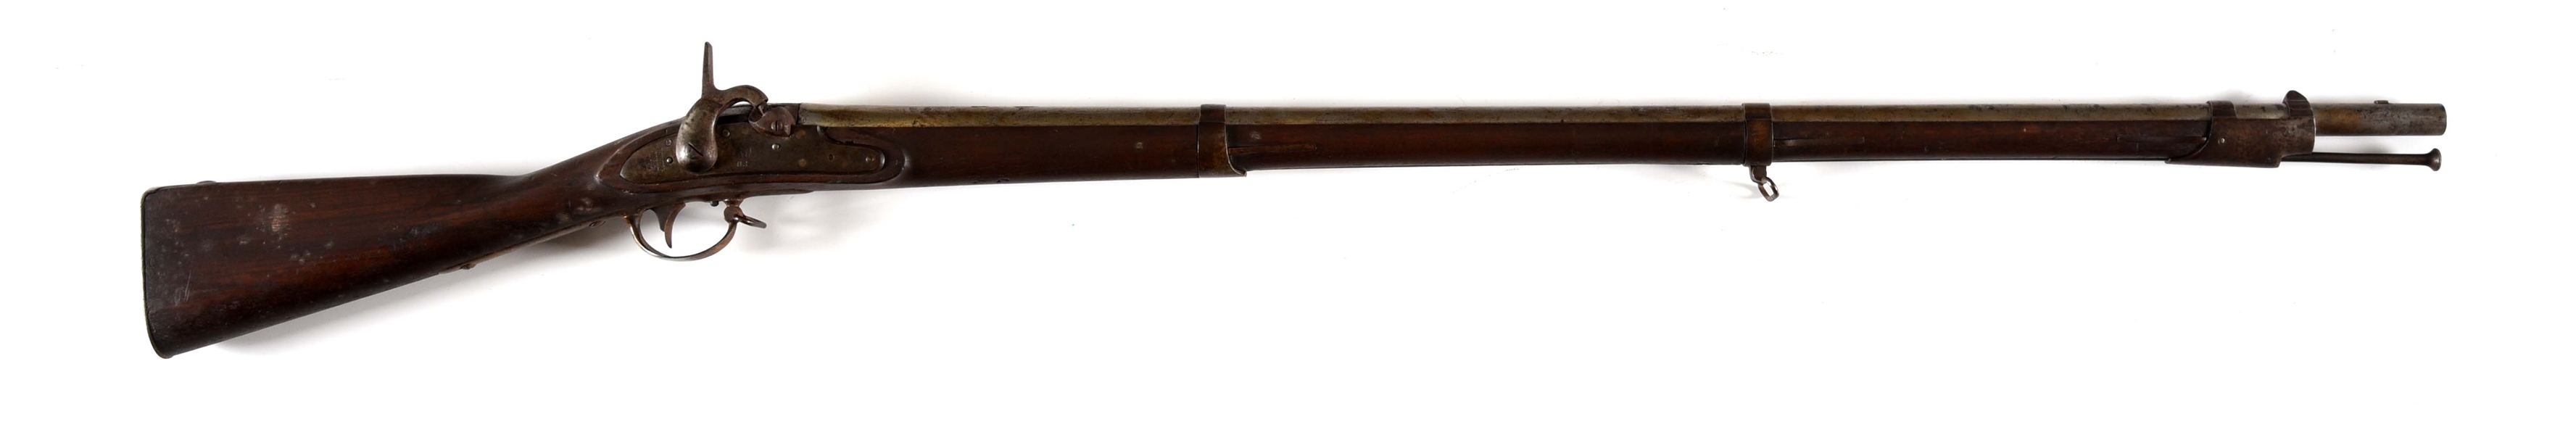 (A) US SPRINGFIELD MODEL 1816 PERCUSSION CONVERSION MUSKET.